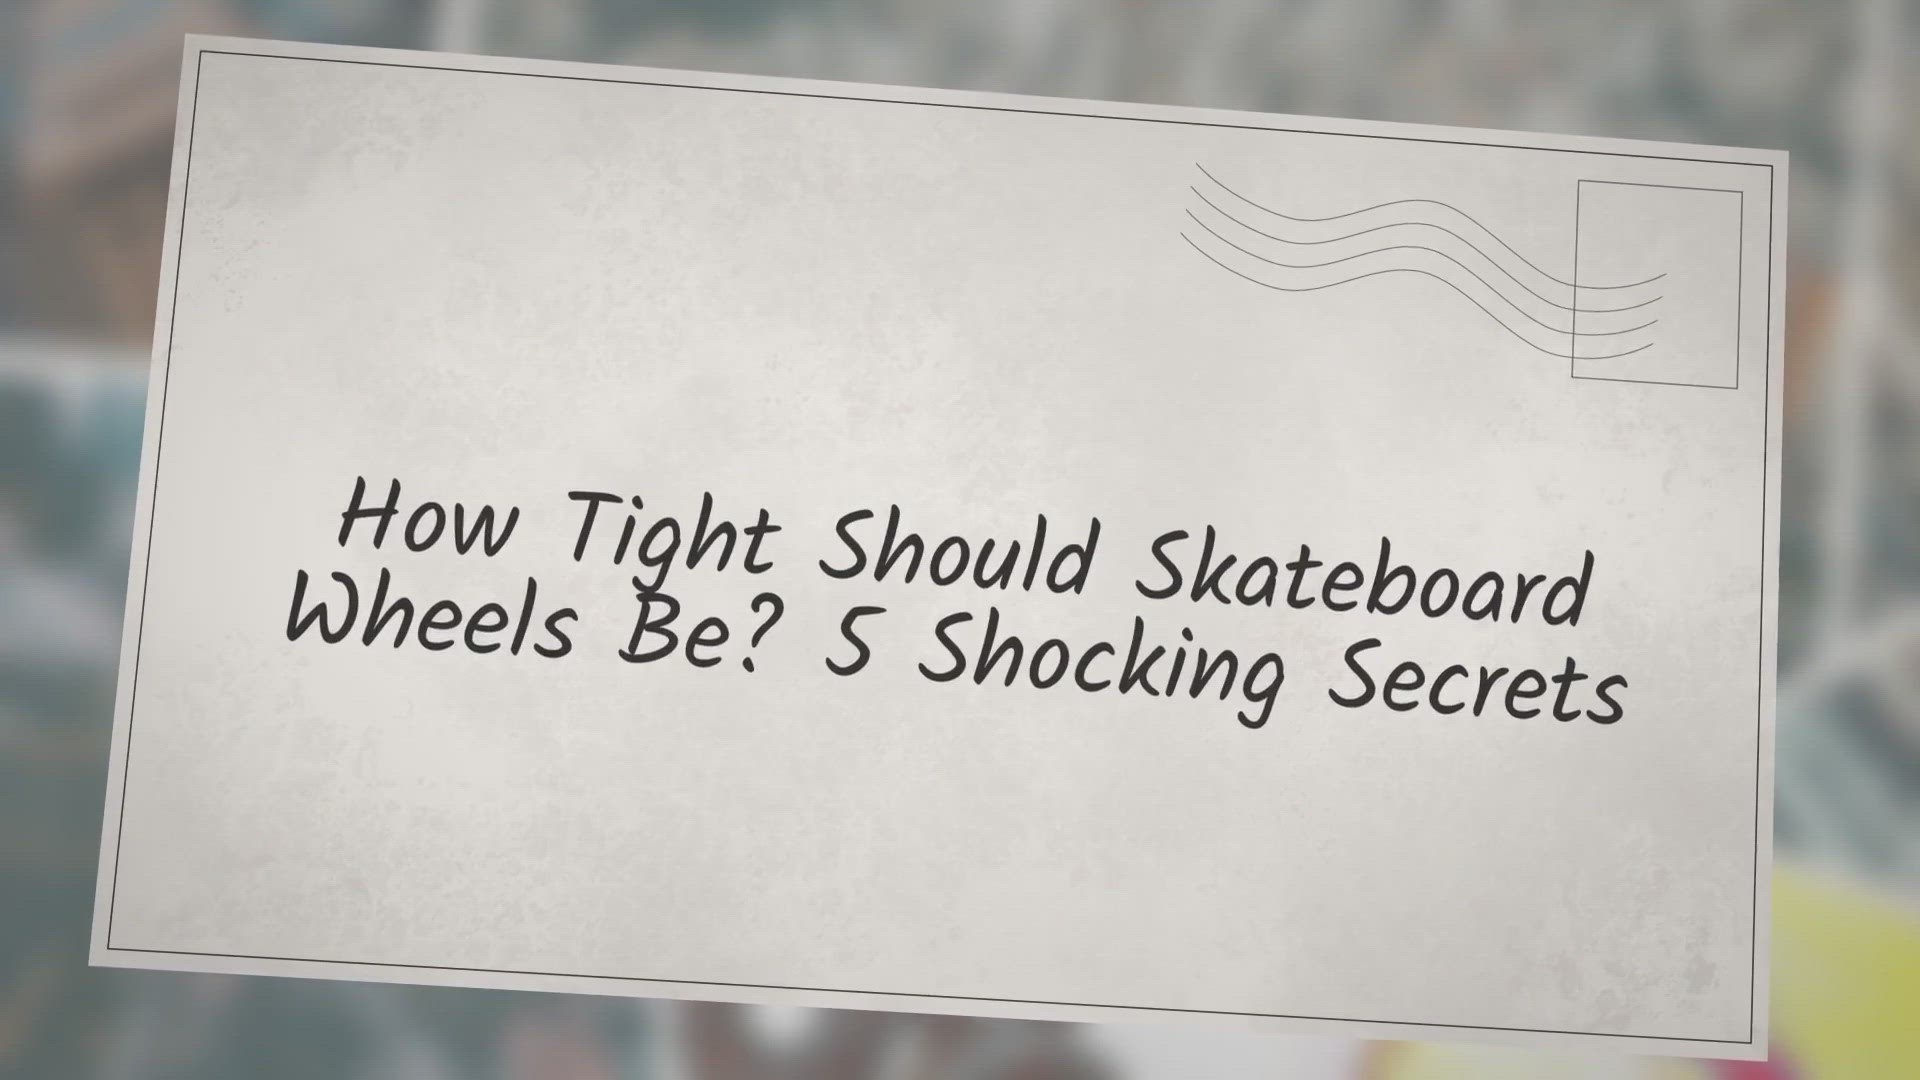 'Video thumbnail for How Tight Should Skateboard Wheels Be? 5 Shocking Secrets'